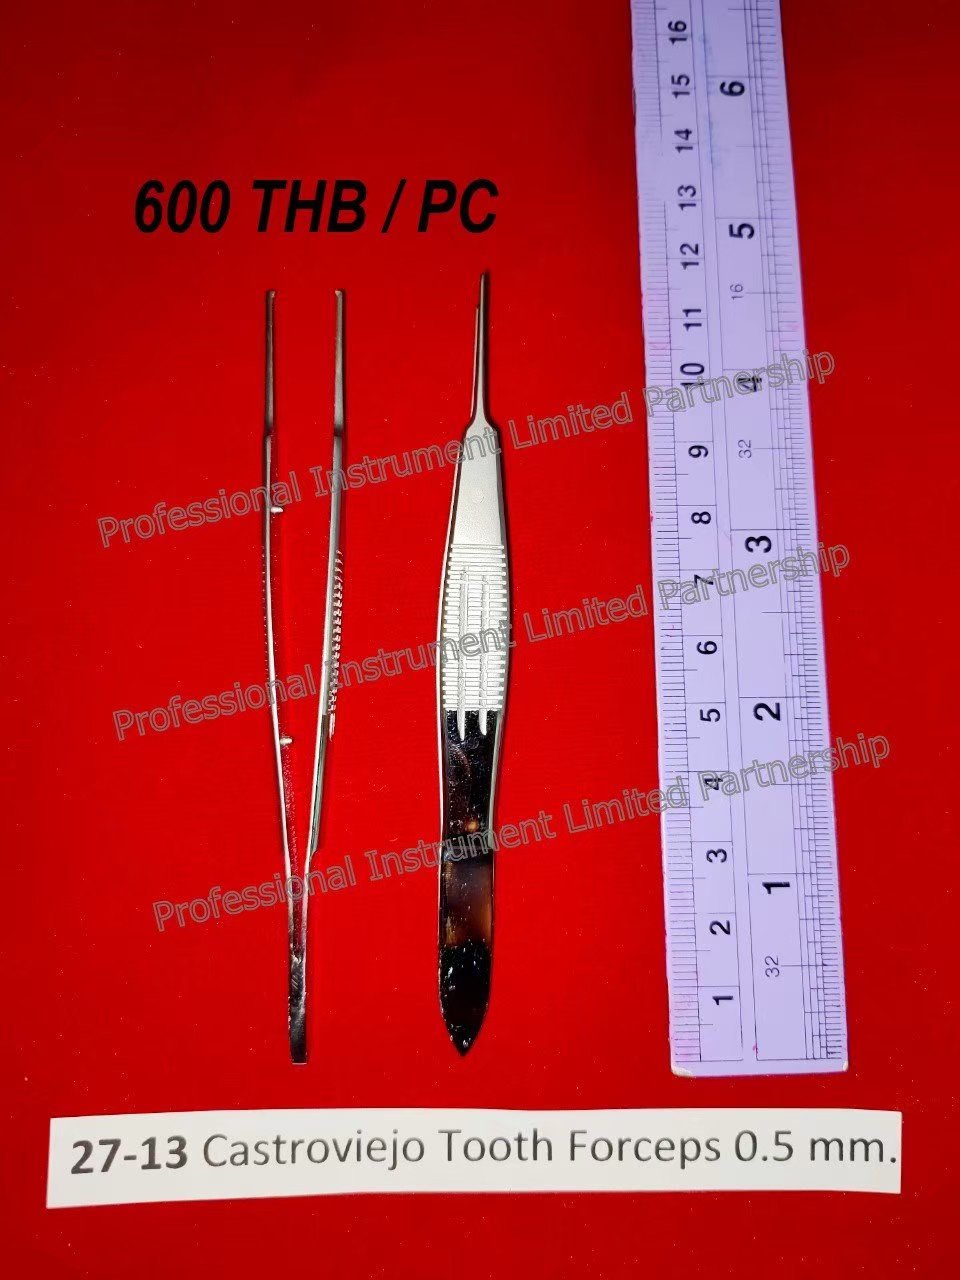 Castroveijo Tooth Forceps 0.5mm